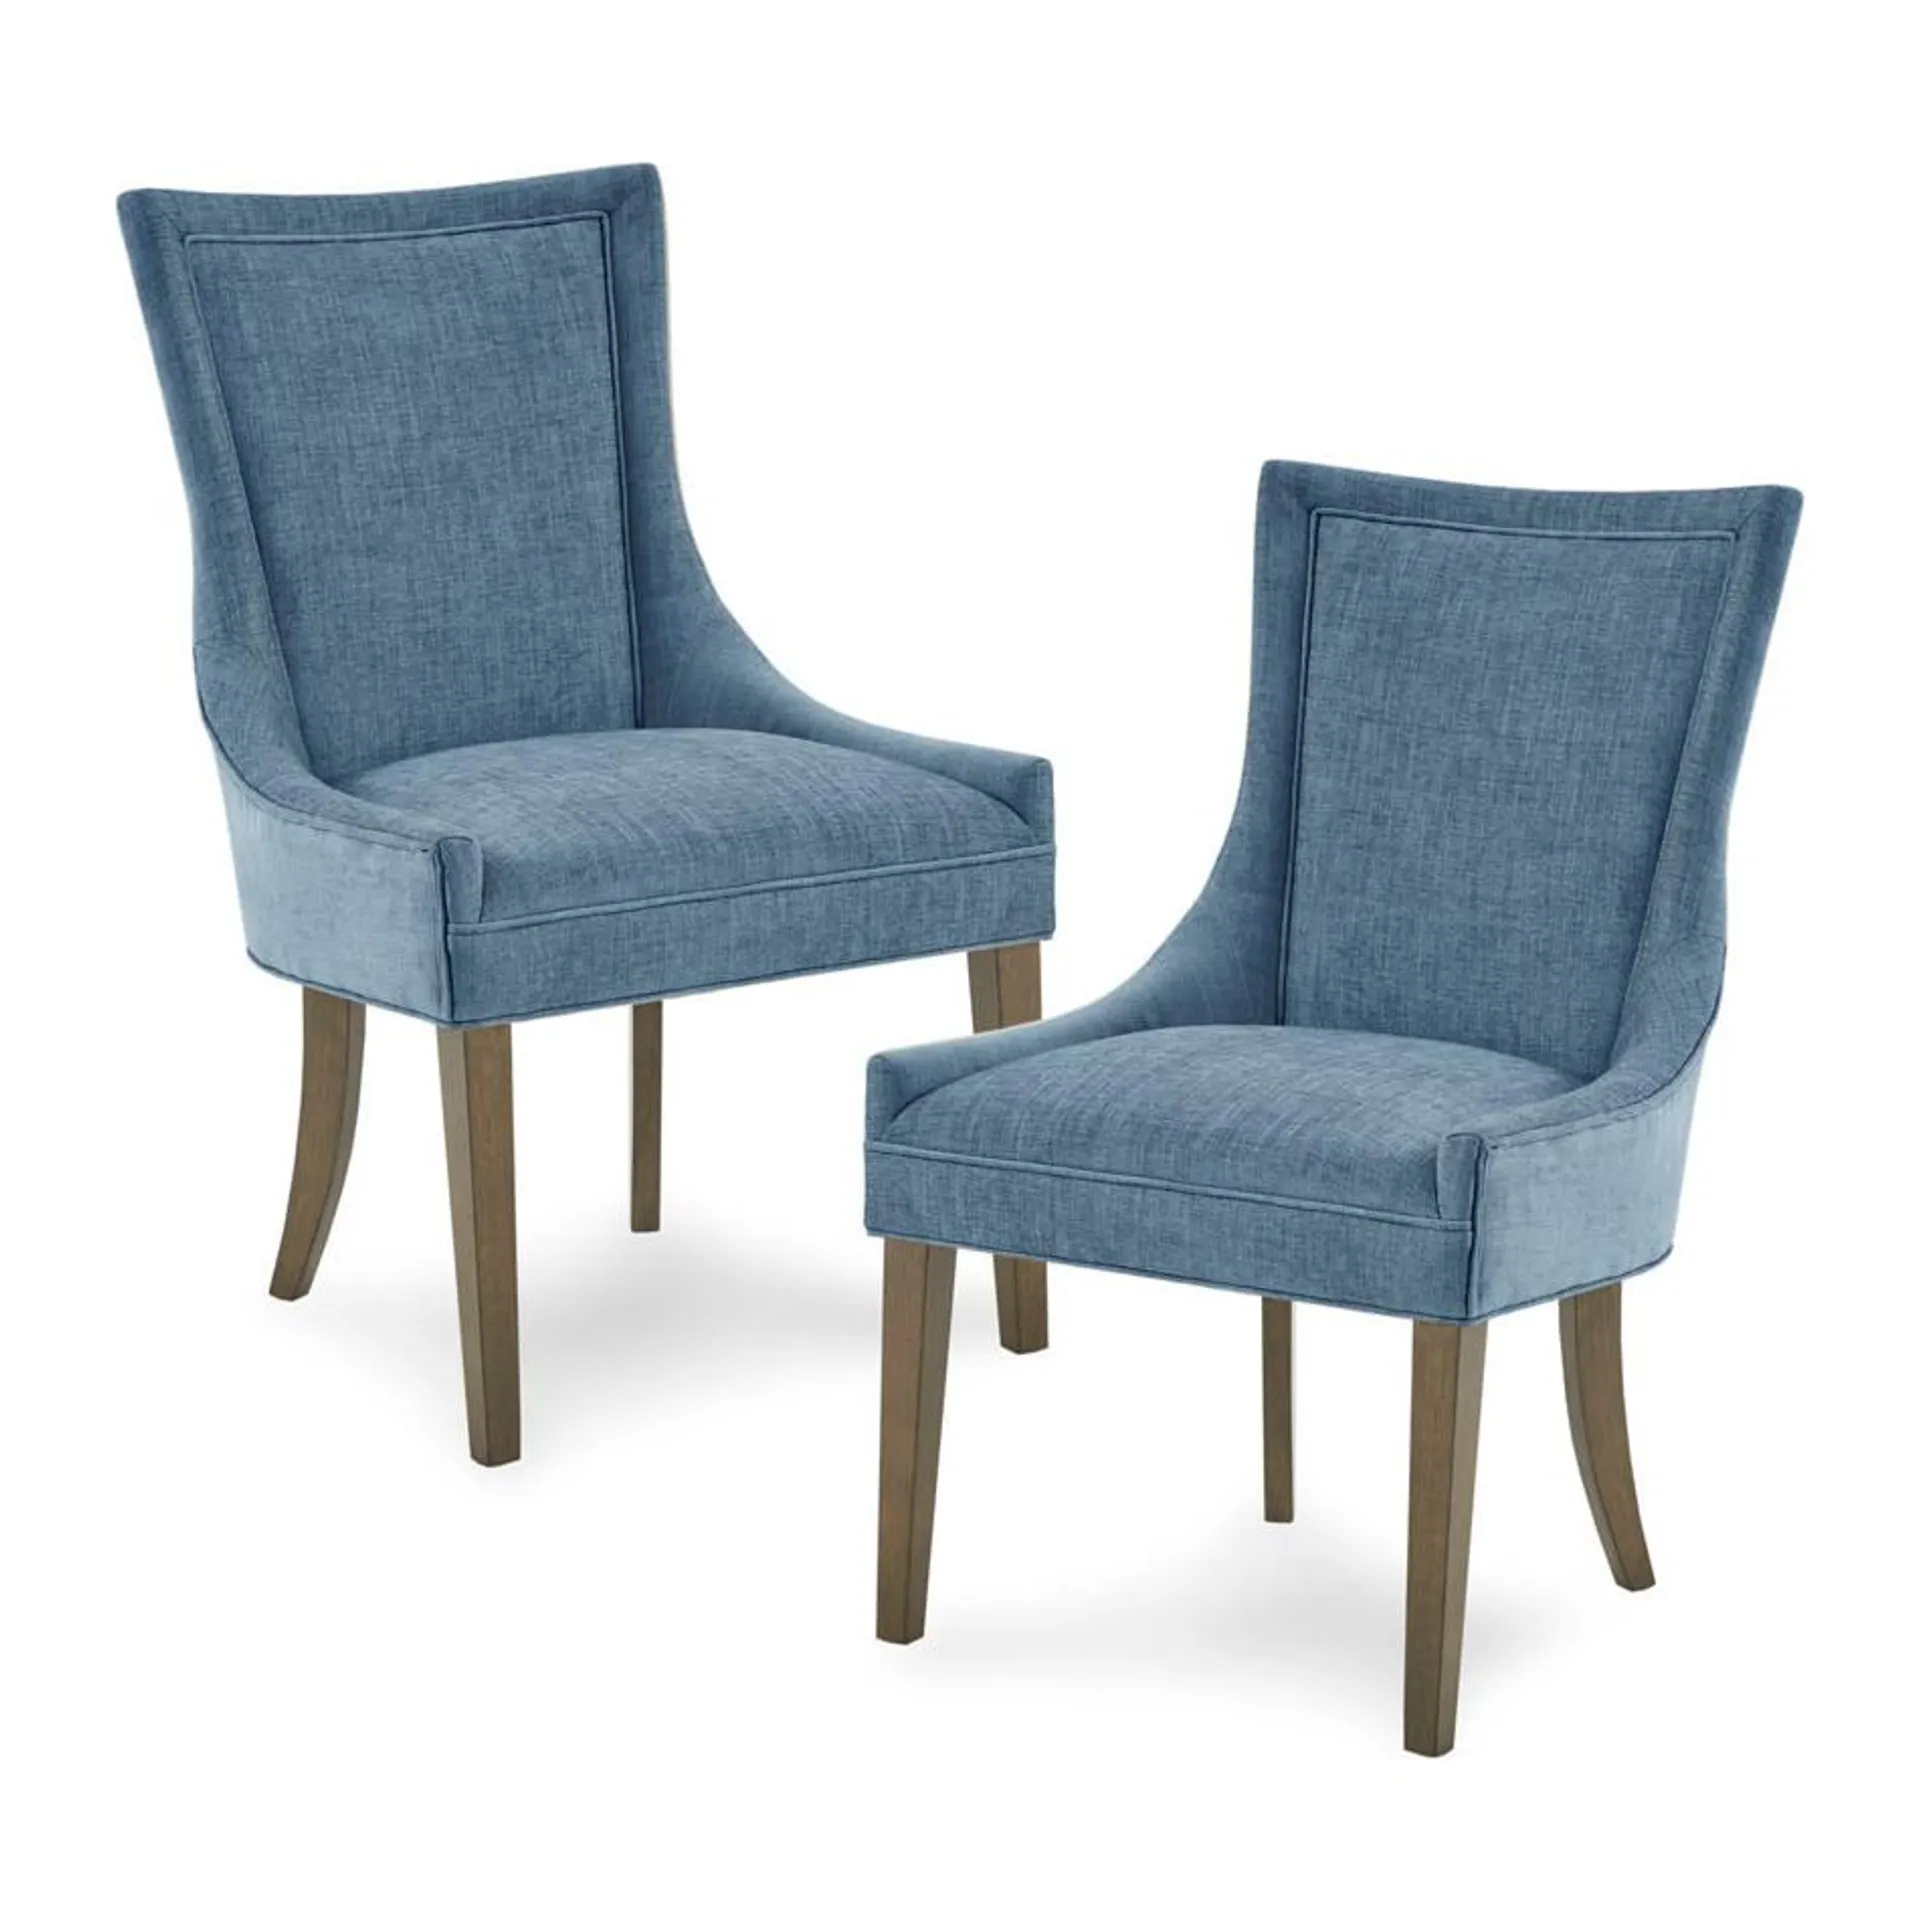 Oakmont Set of 2 Dining Chairs